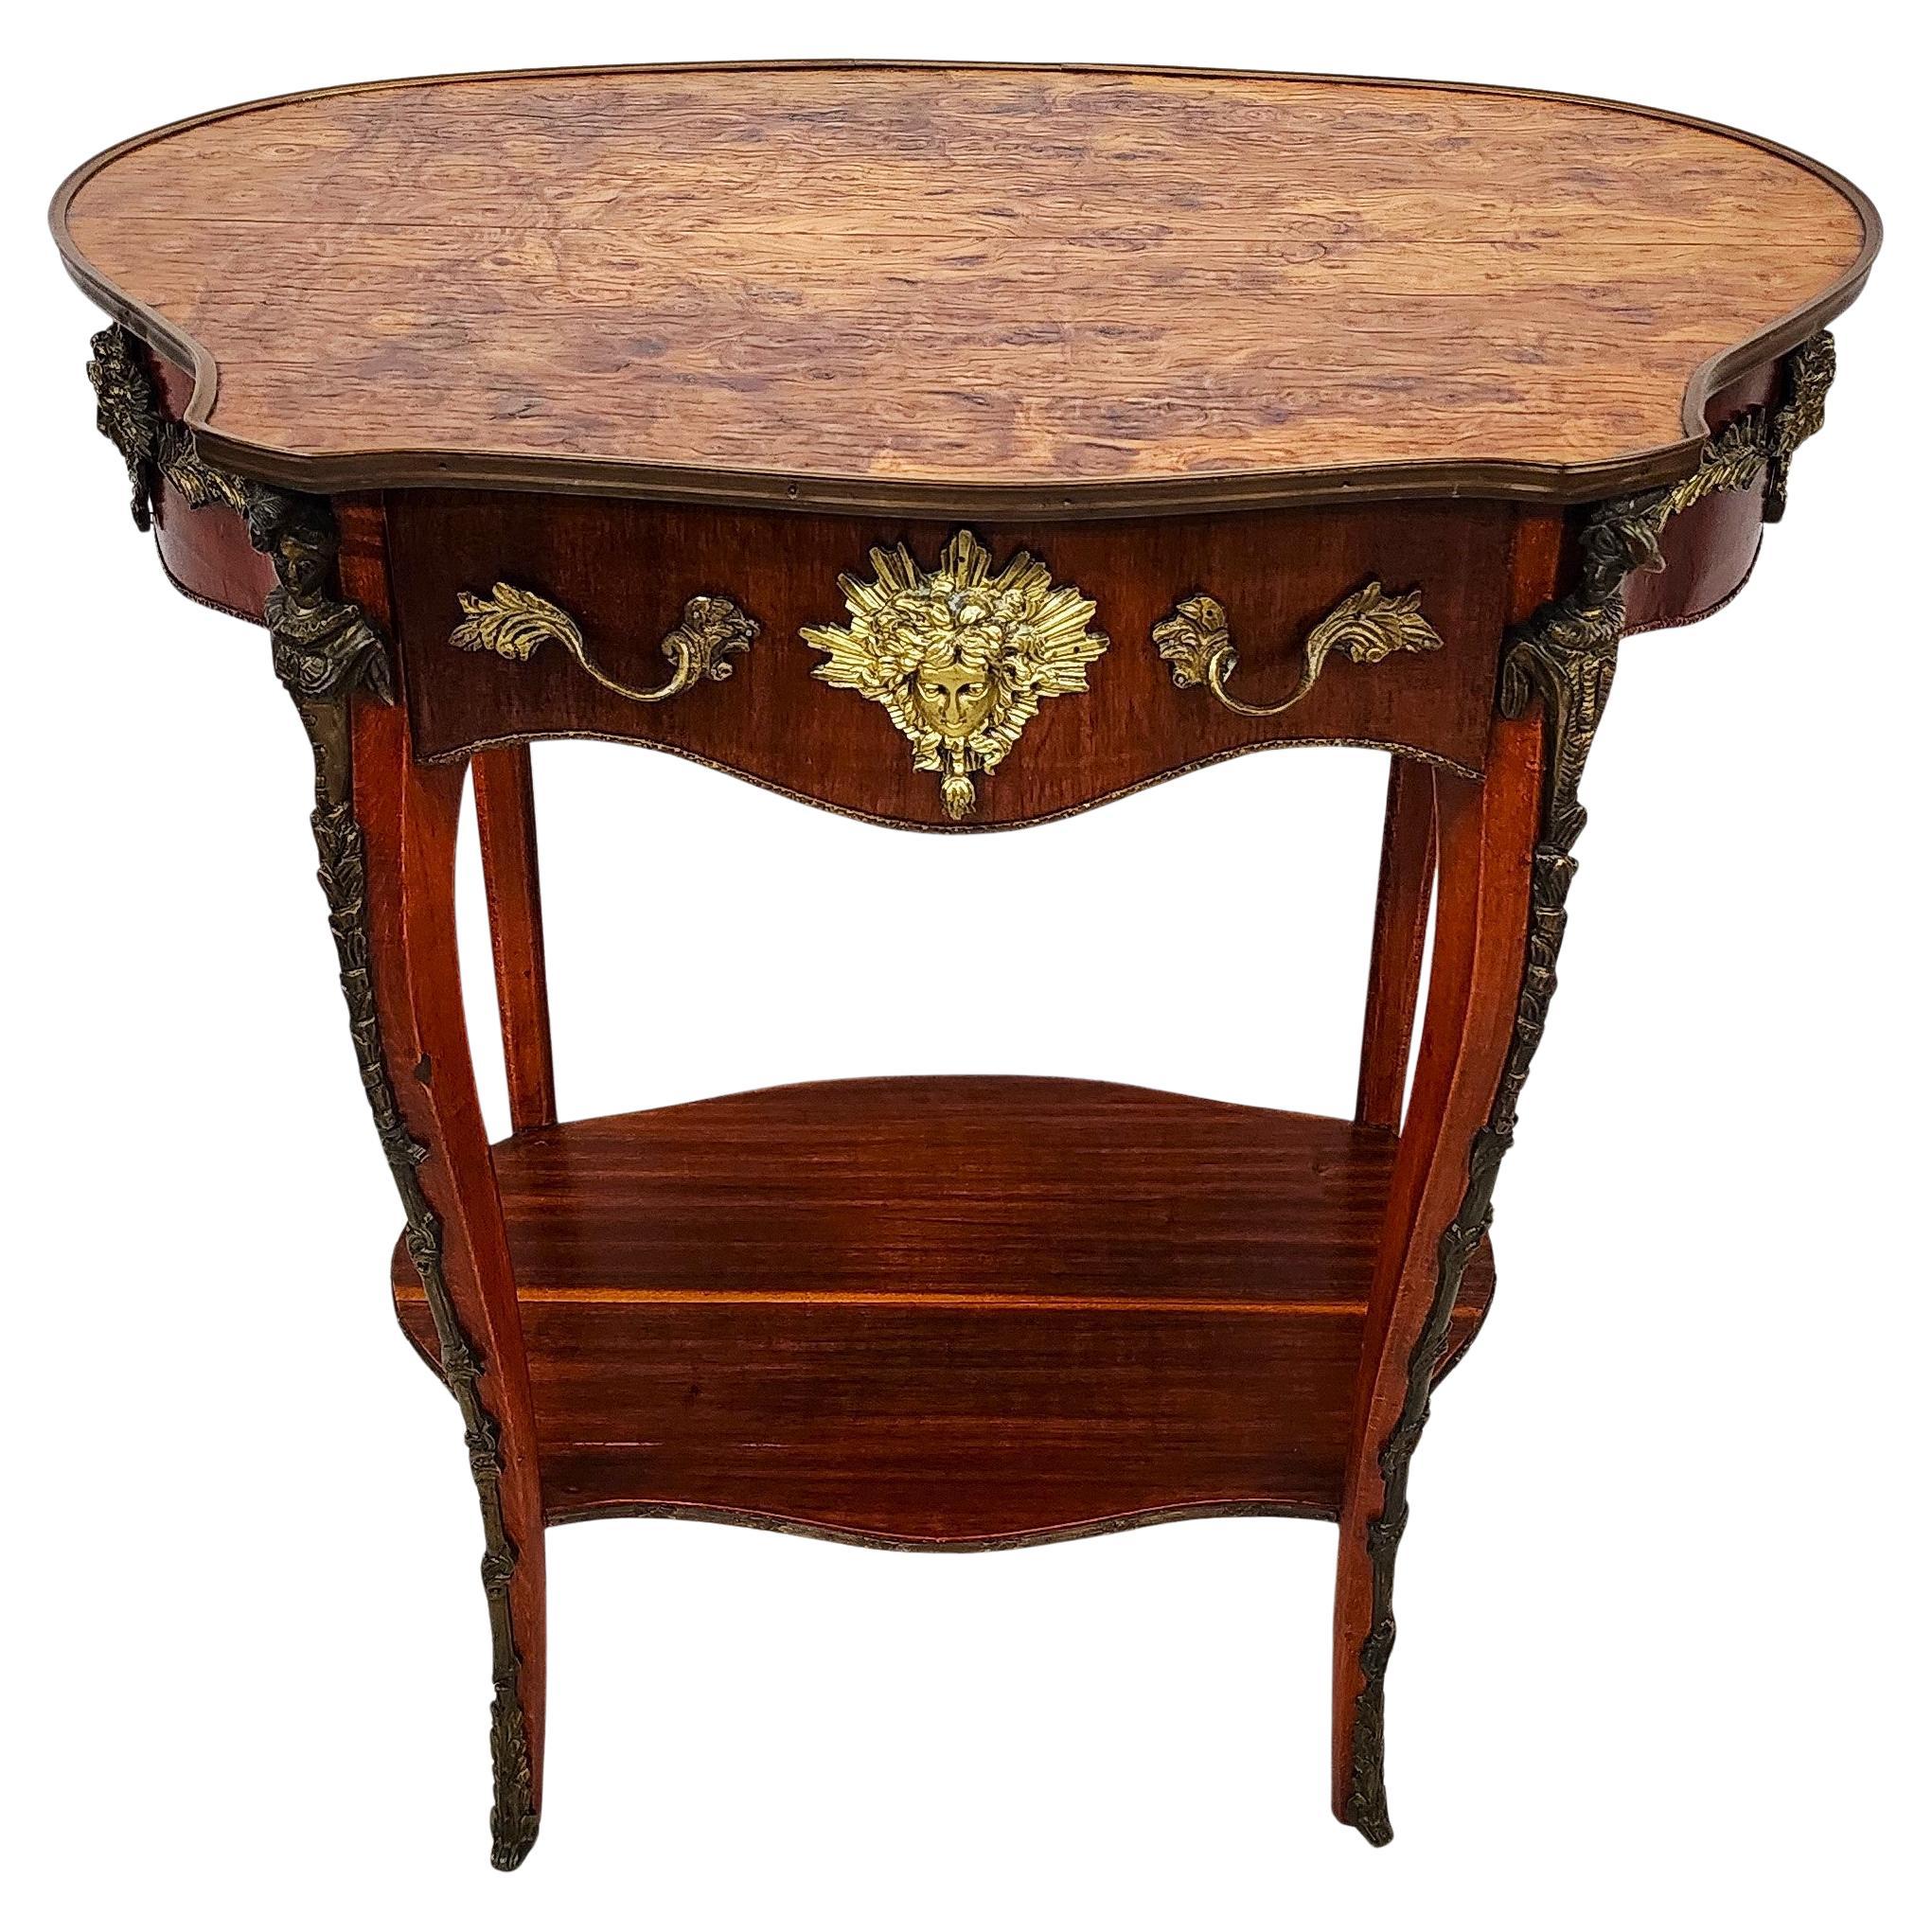 French Centre Side Table Louis XV Ormolu Mounts